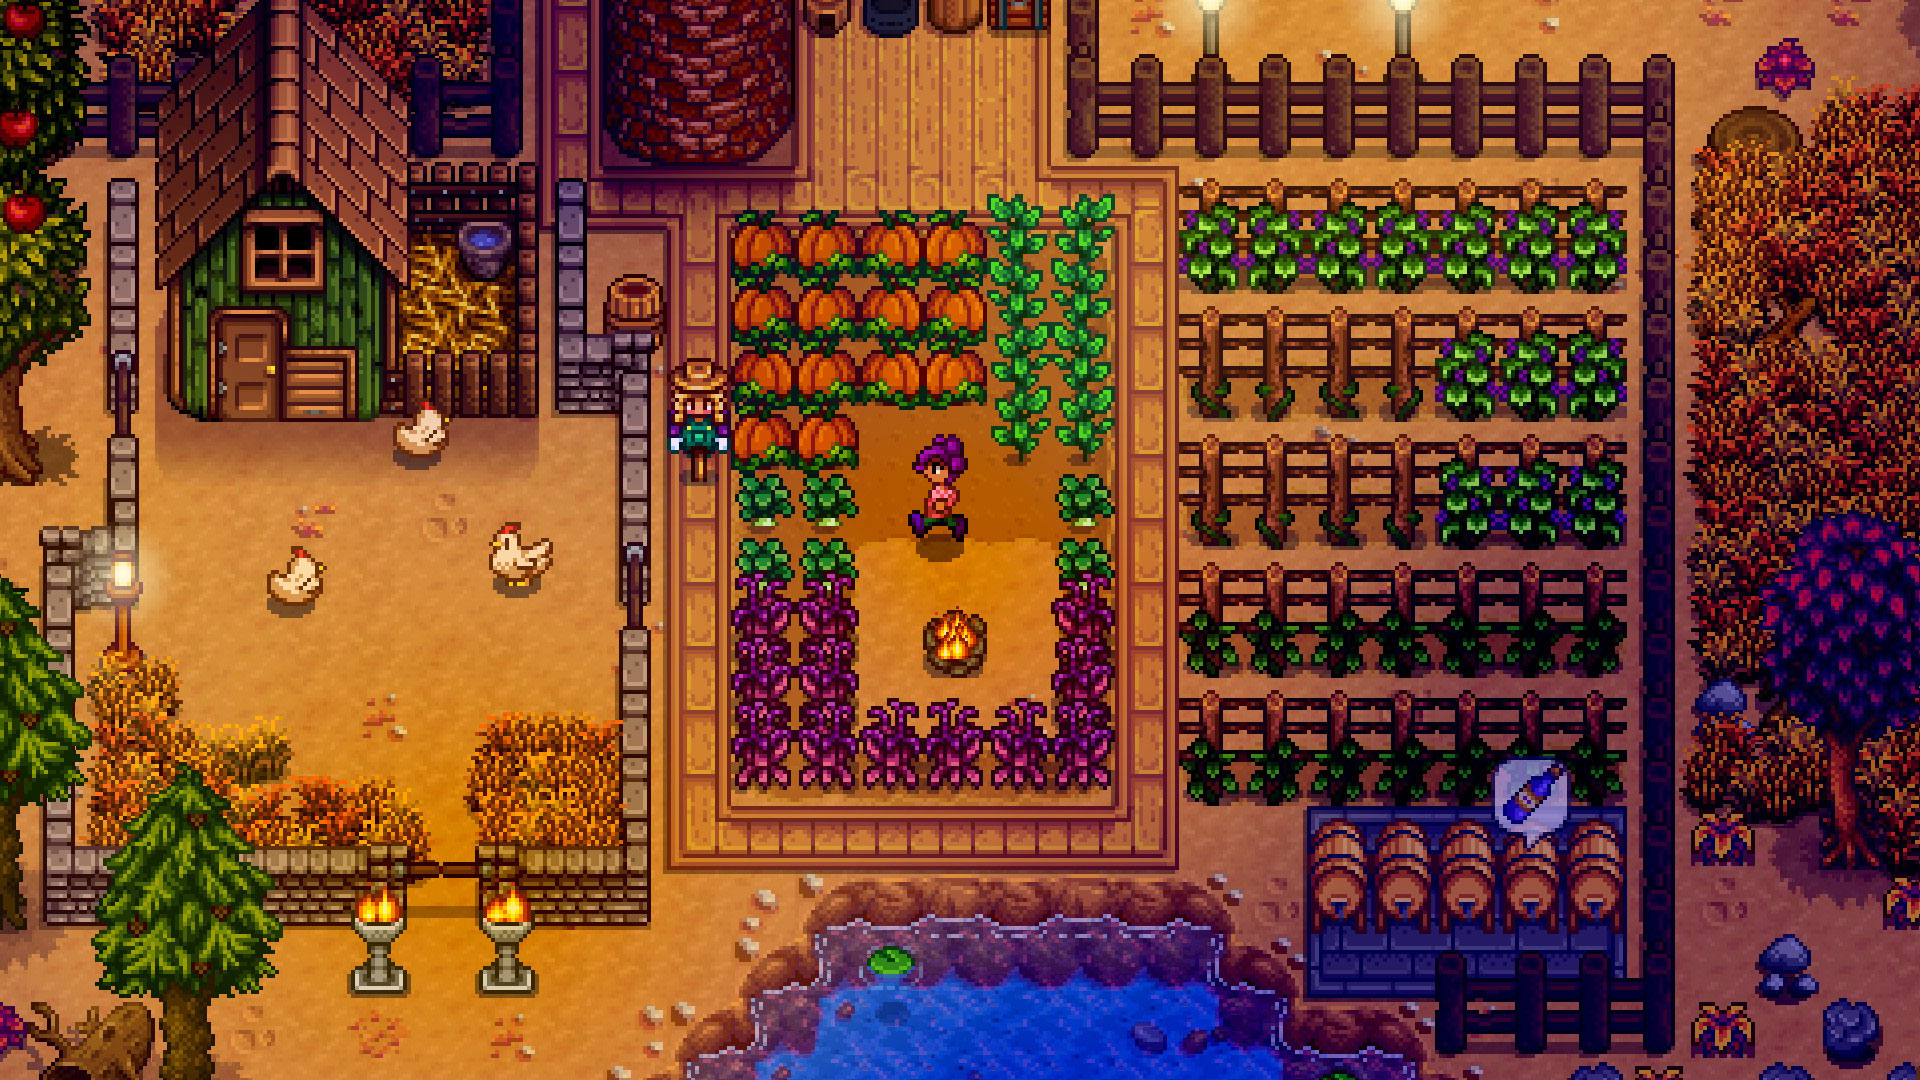 My Favorite Games to Play on the Steam Deck - Stardew Valley